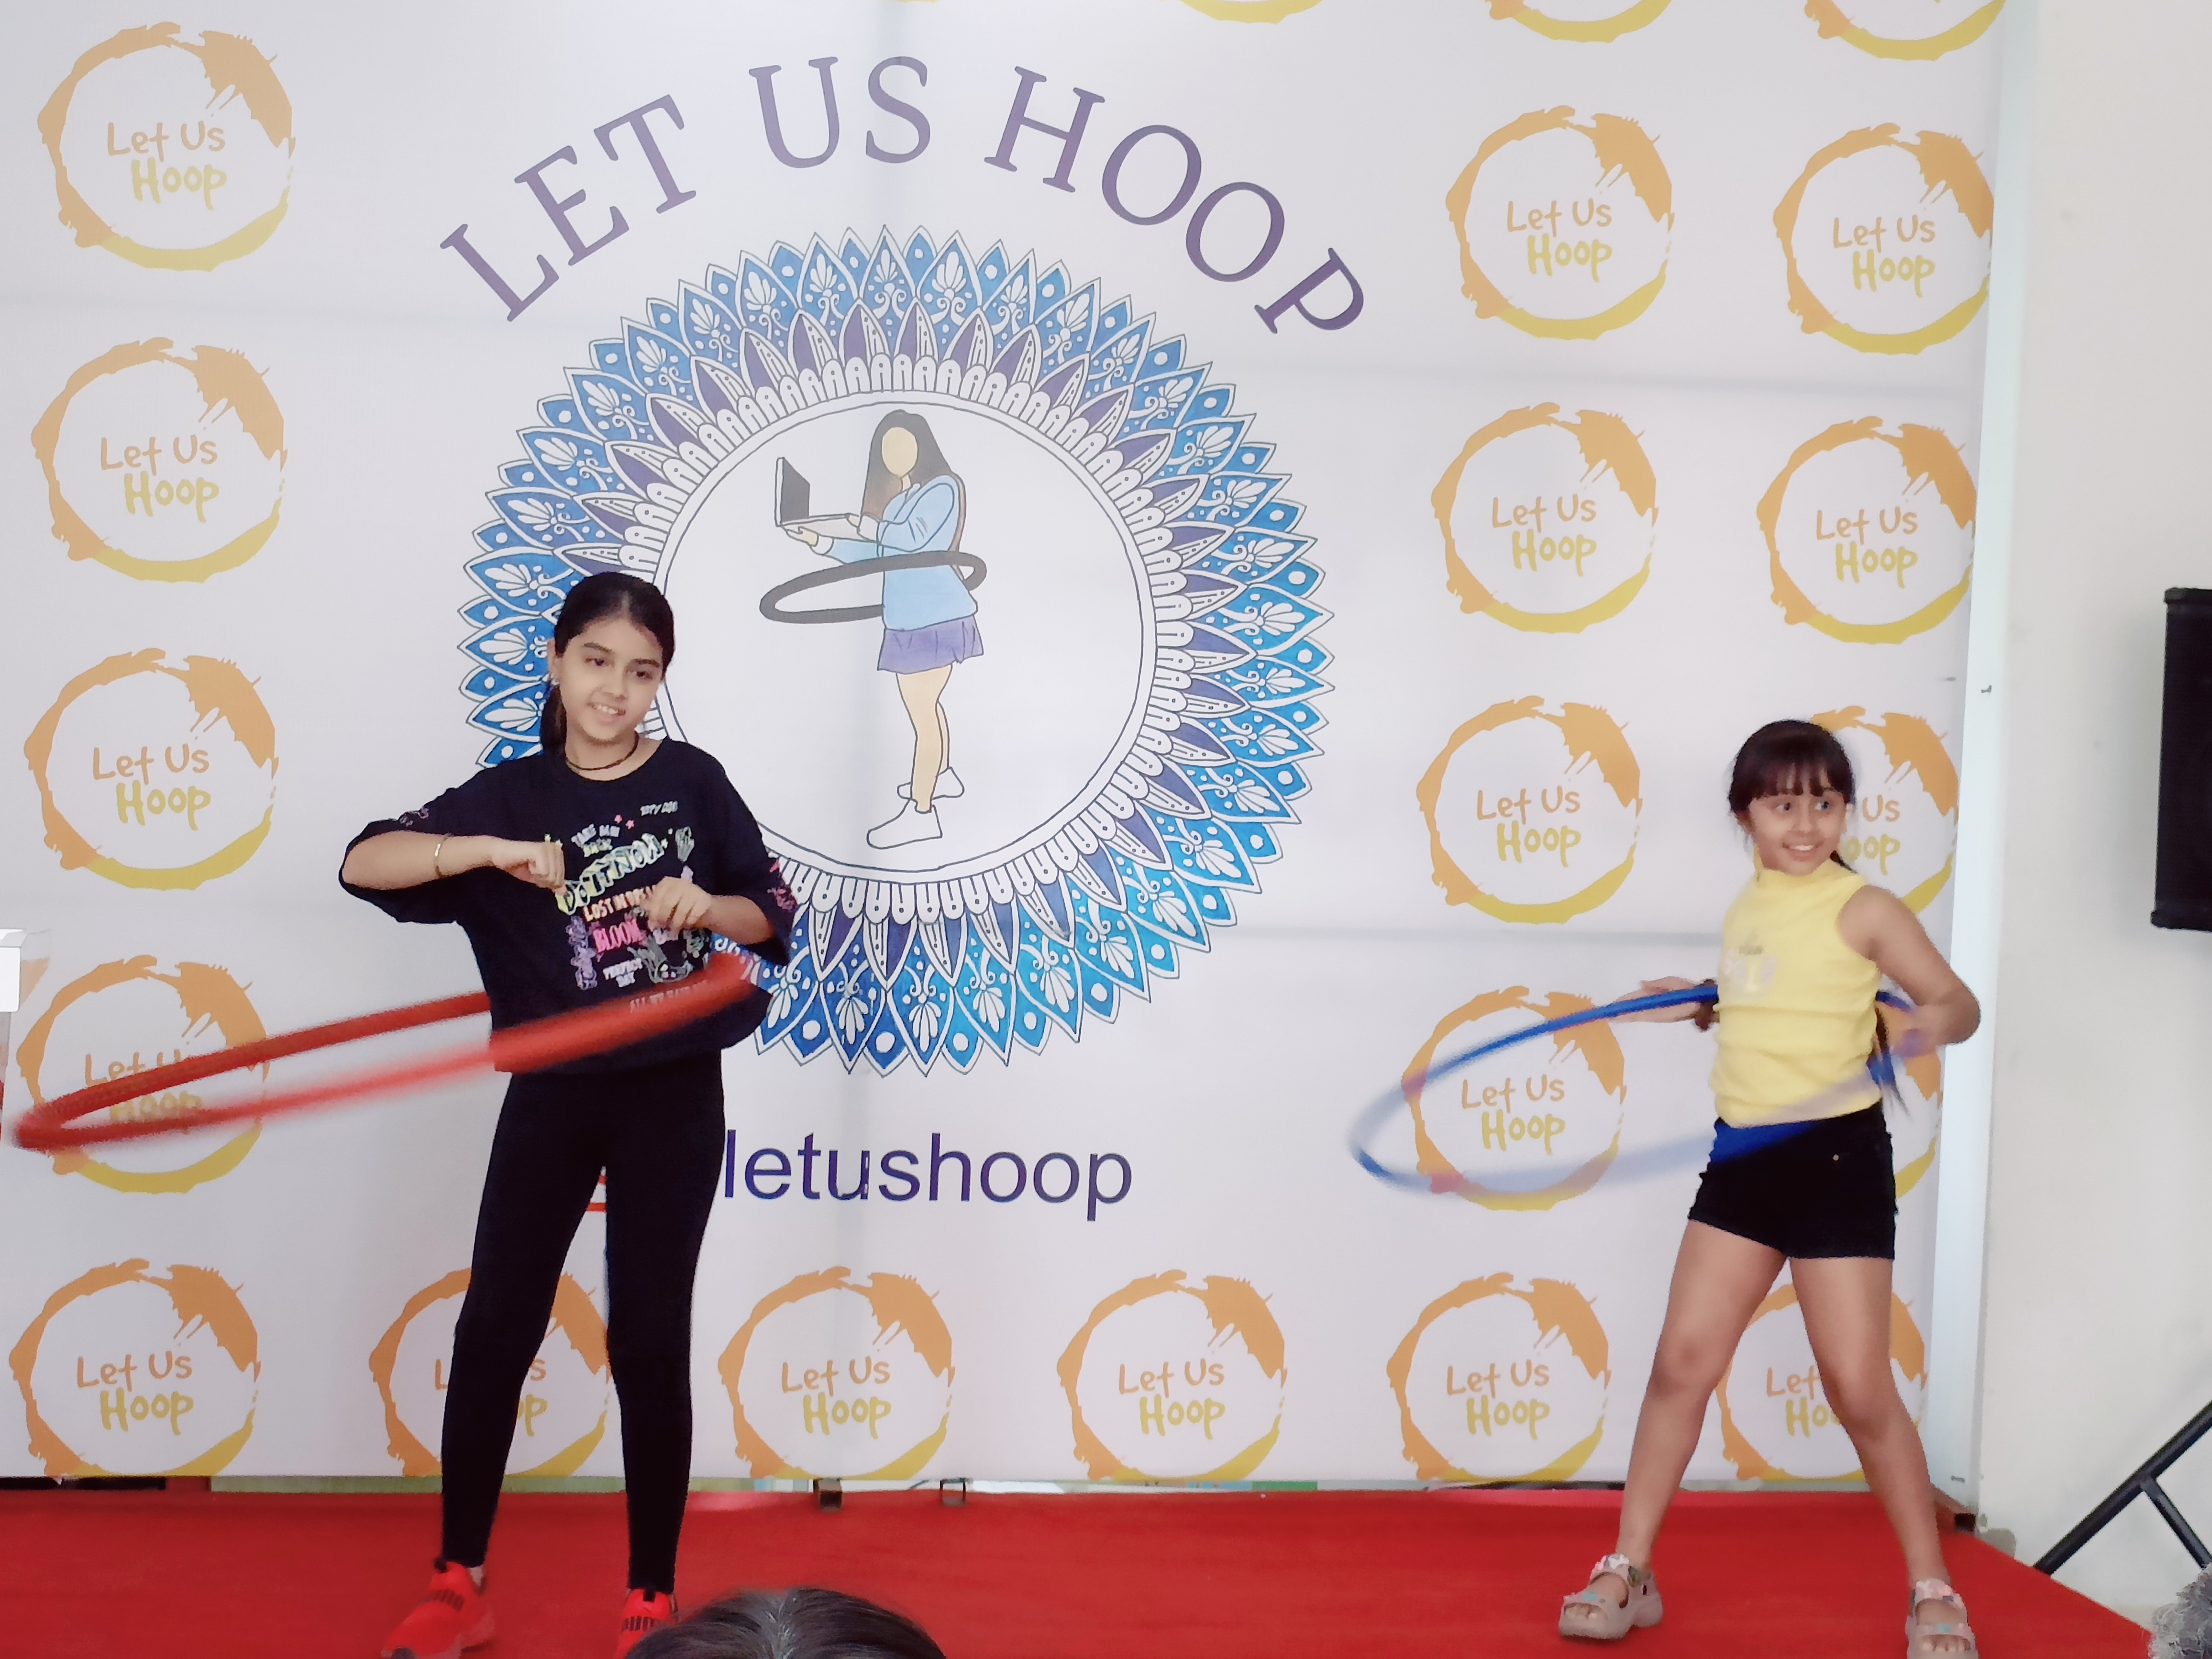 Hoop-a-Thon Event for 24 Hours at Celebration Mall in Udaipur